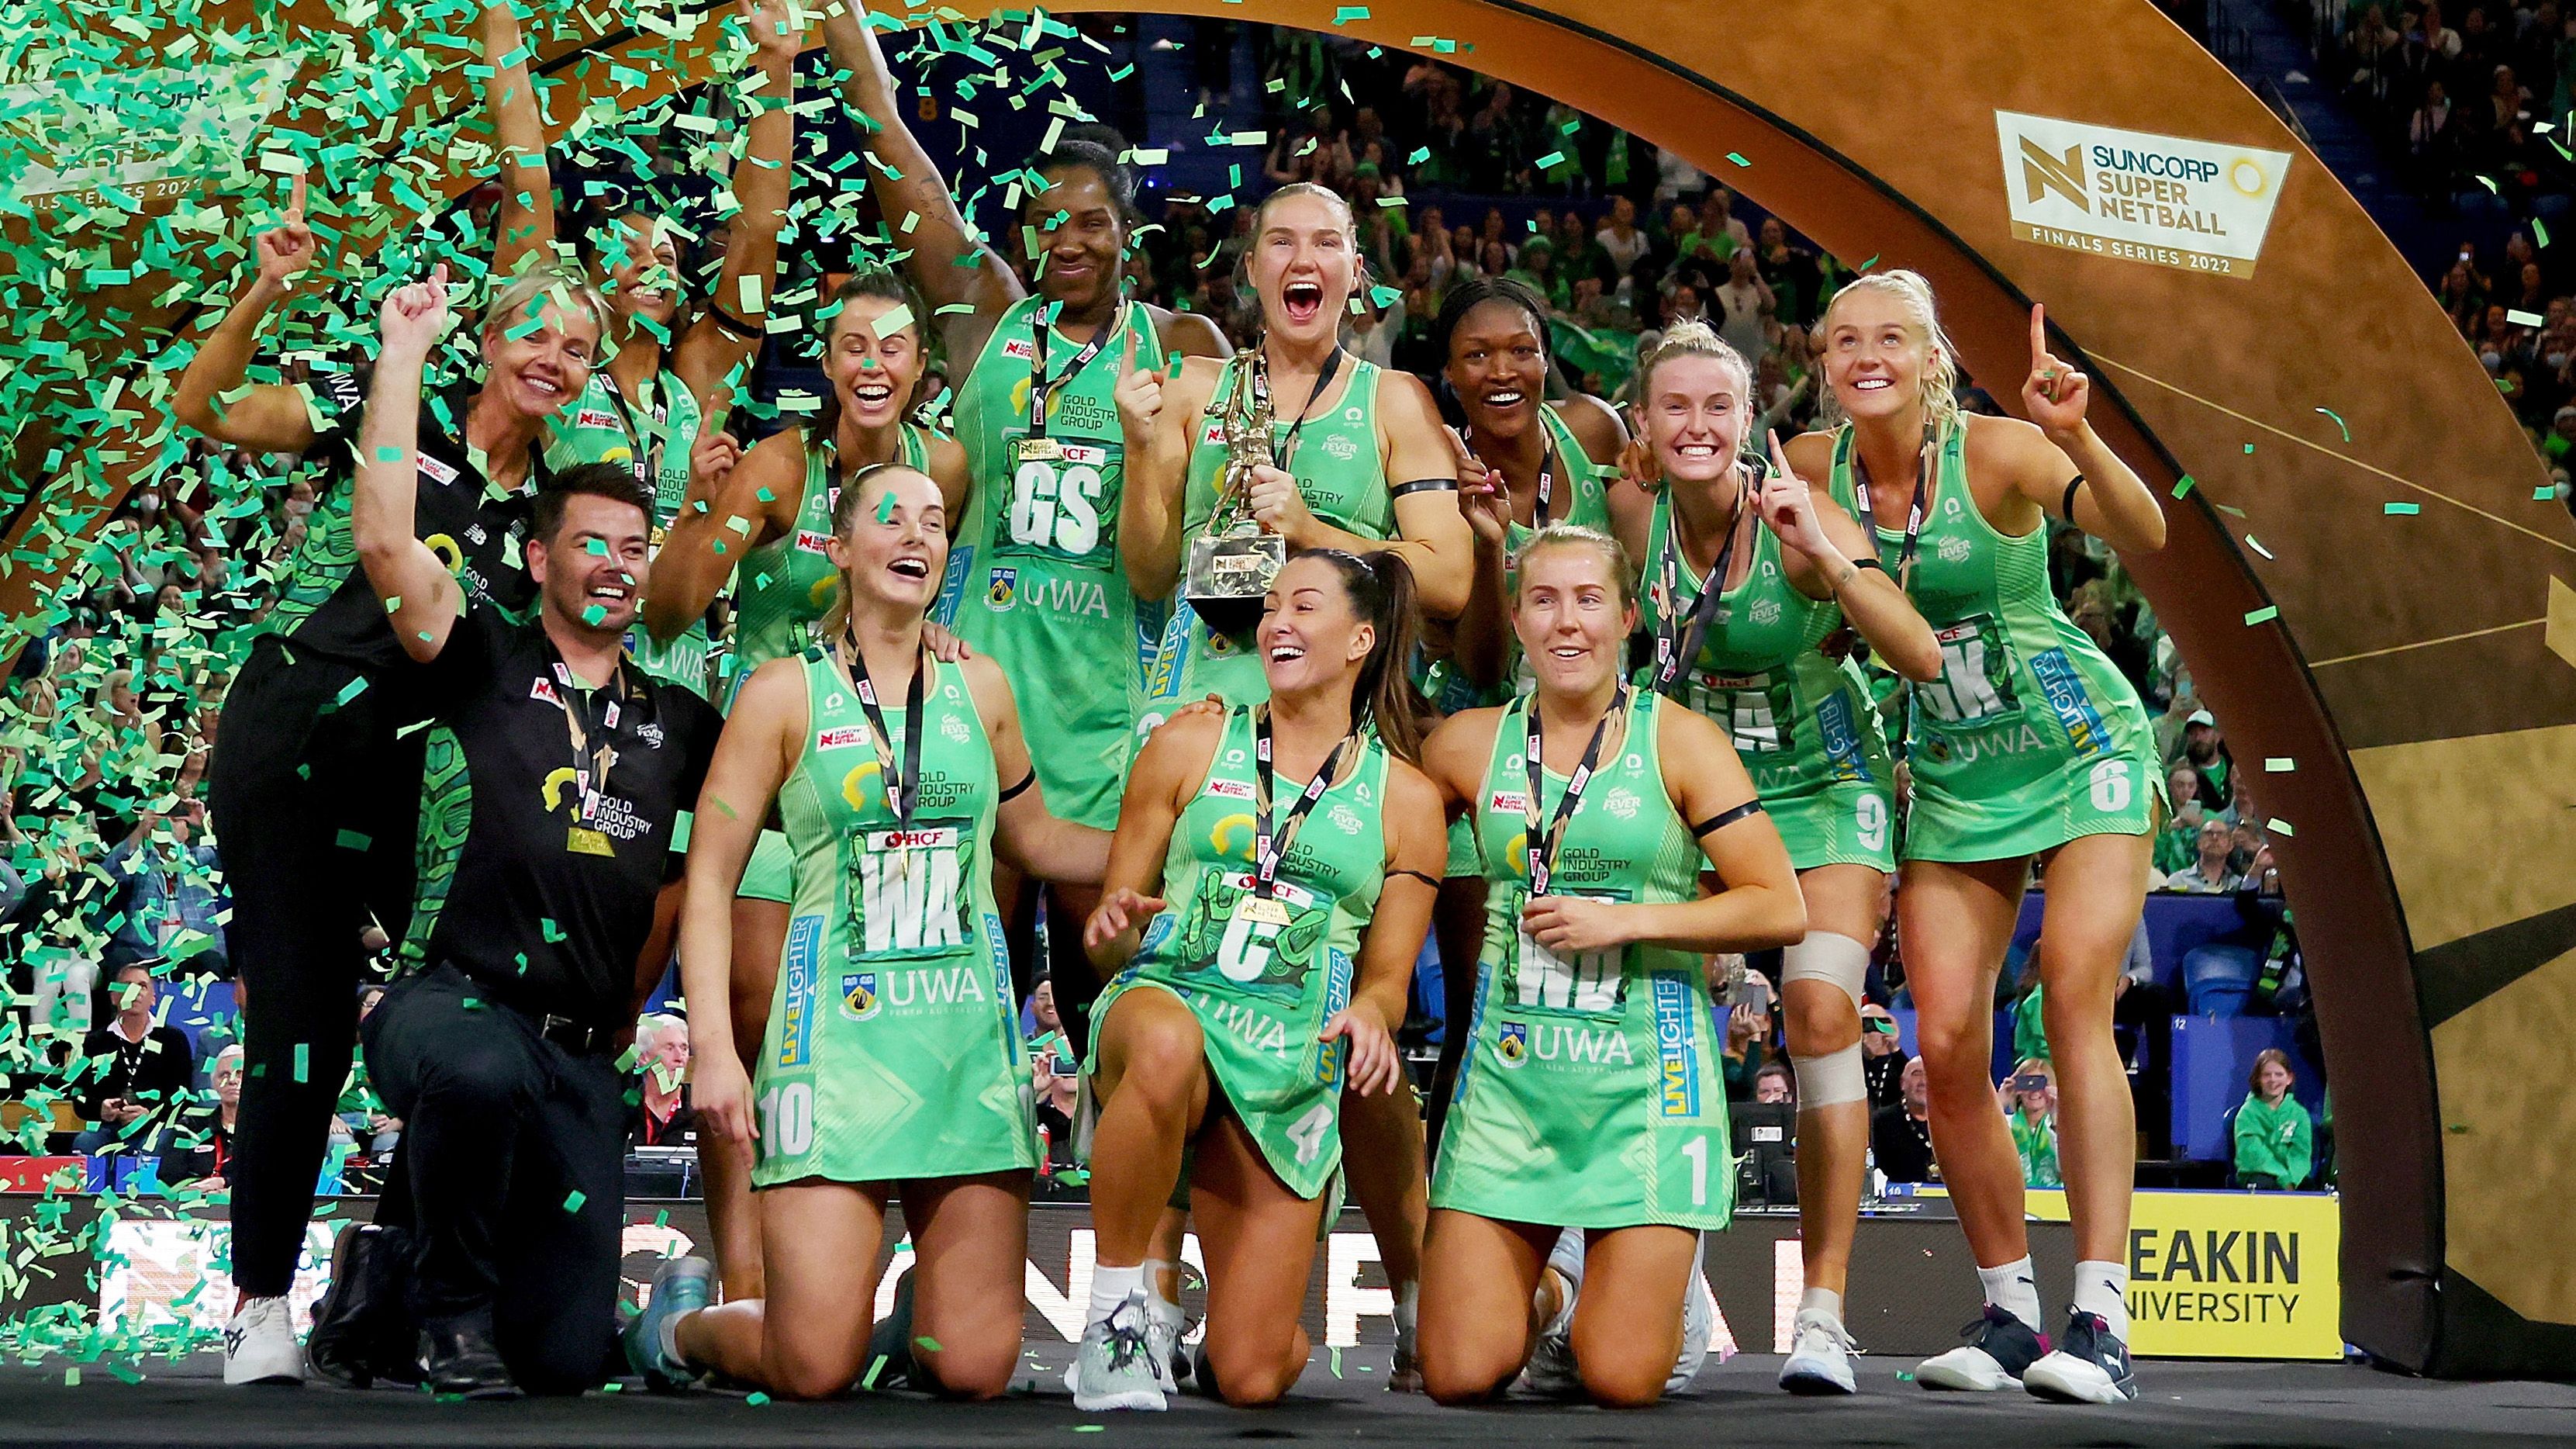 West Coast Fever players Celebrate the win during the Super Netball Grand Final match between West Coast Fever and Melbourne Vixens at RAC Arena, on July 03, 2022, in Perth, Australia. (Photo by James Worsfold/Getty Images)